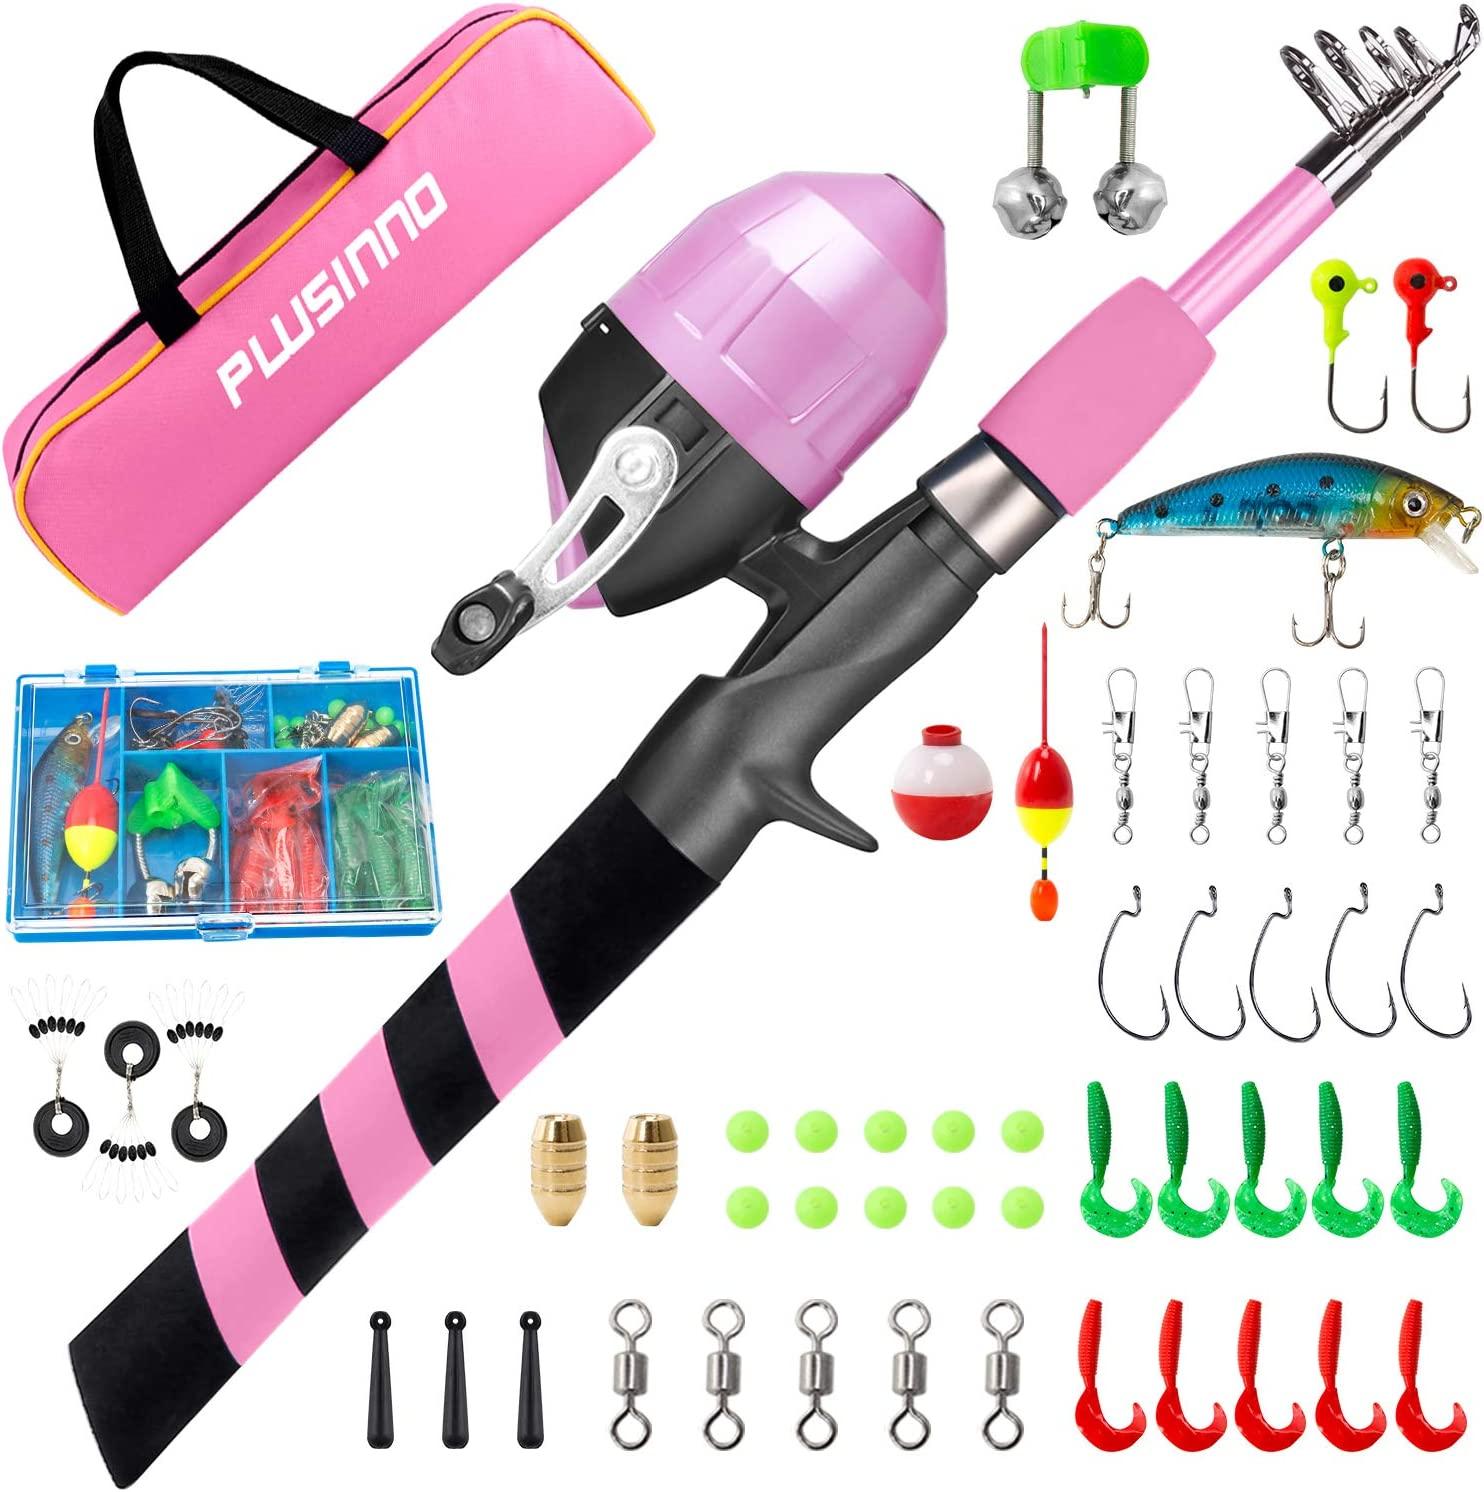 Kids Fishing Pole Kit Portable Telescopic Fishing Rod Tackle Combos Full  Kits With Soft Bait Travel Bag For Boys Girls Youth Red